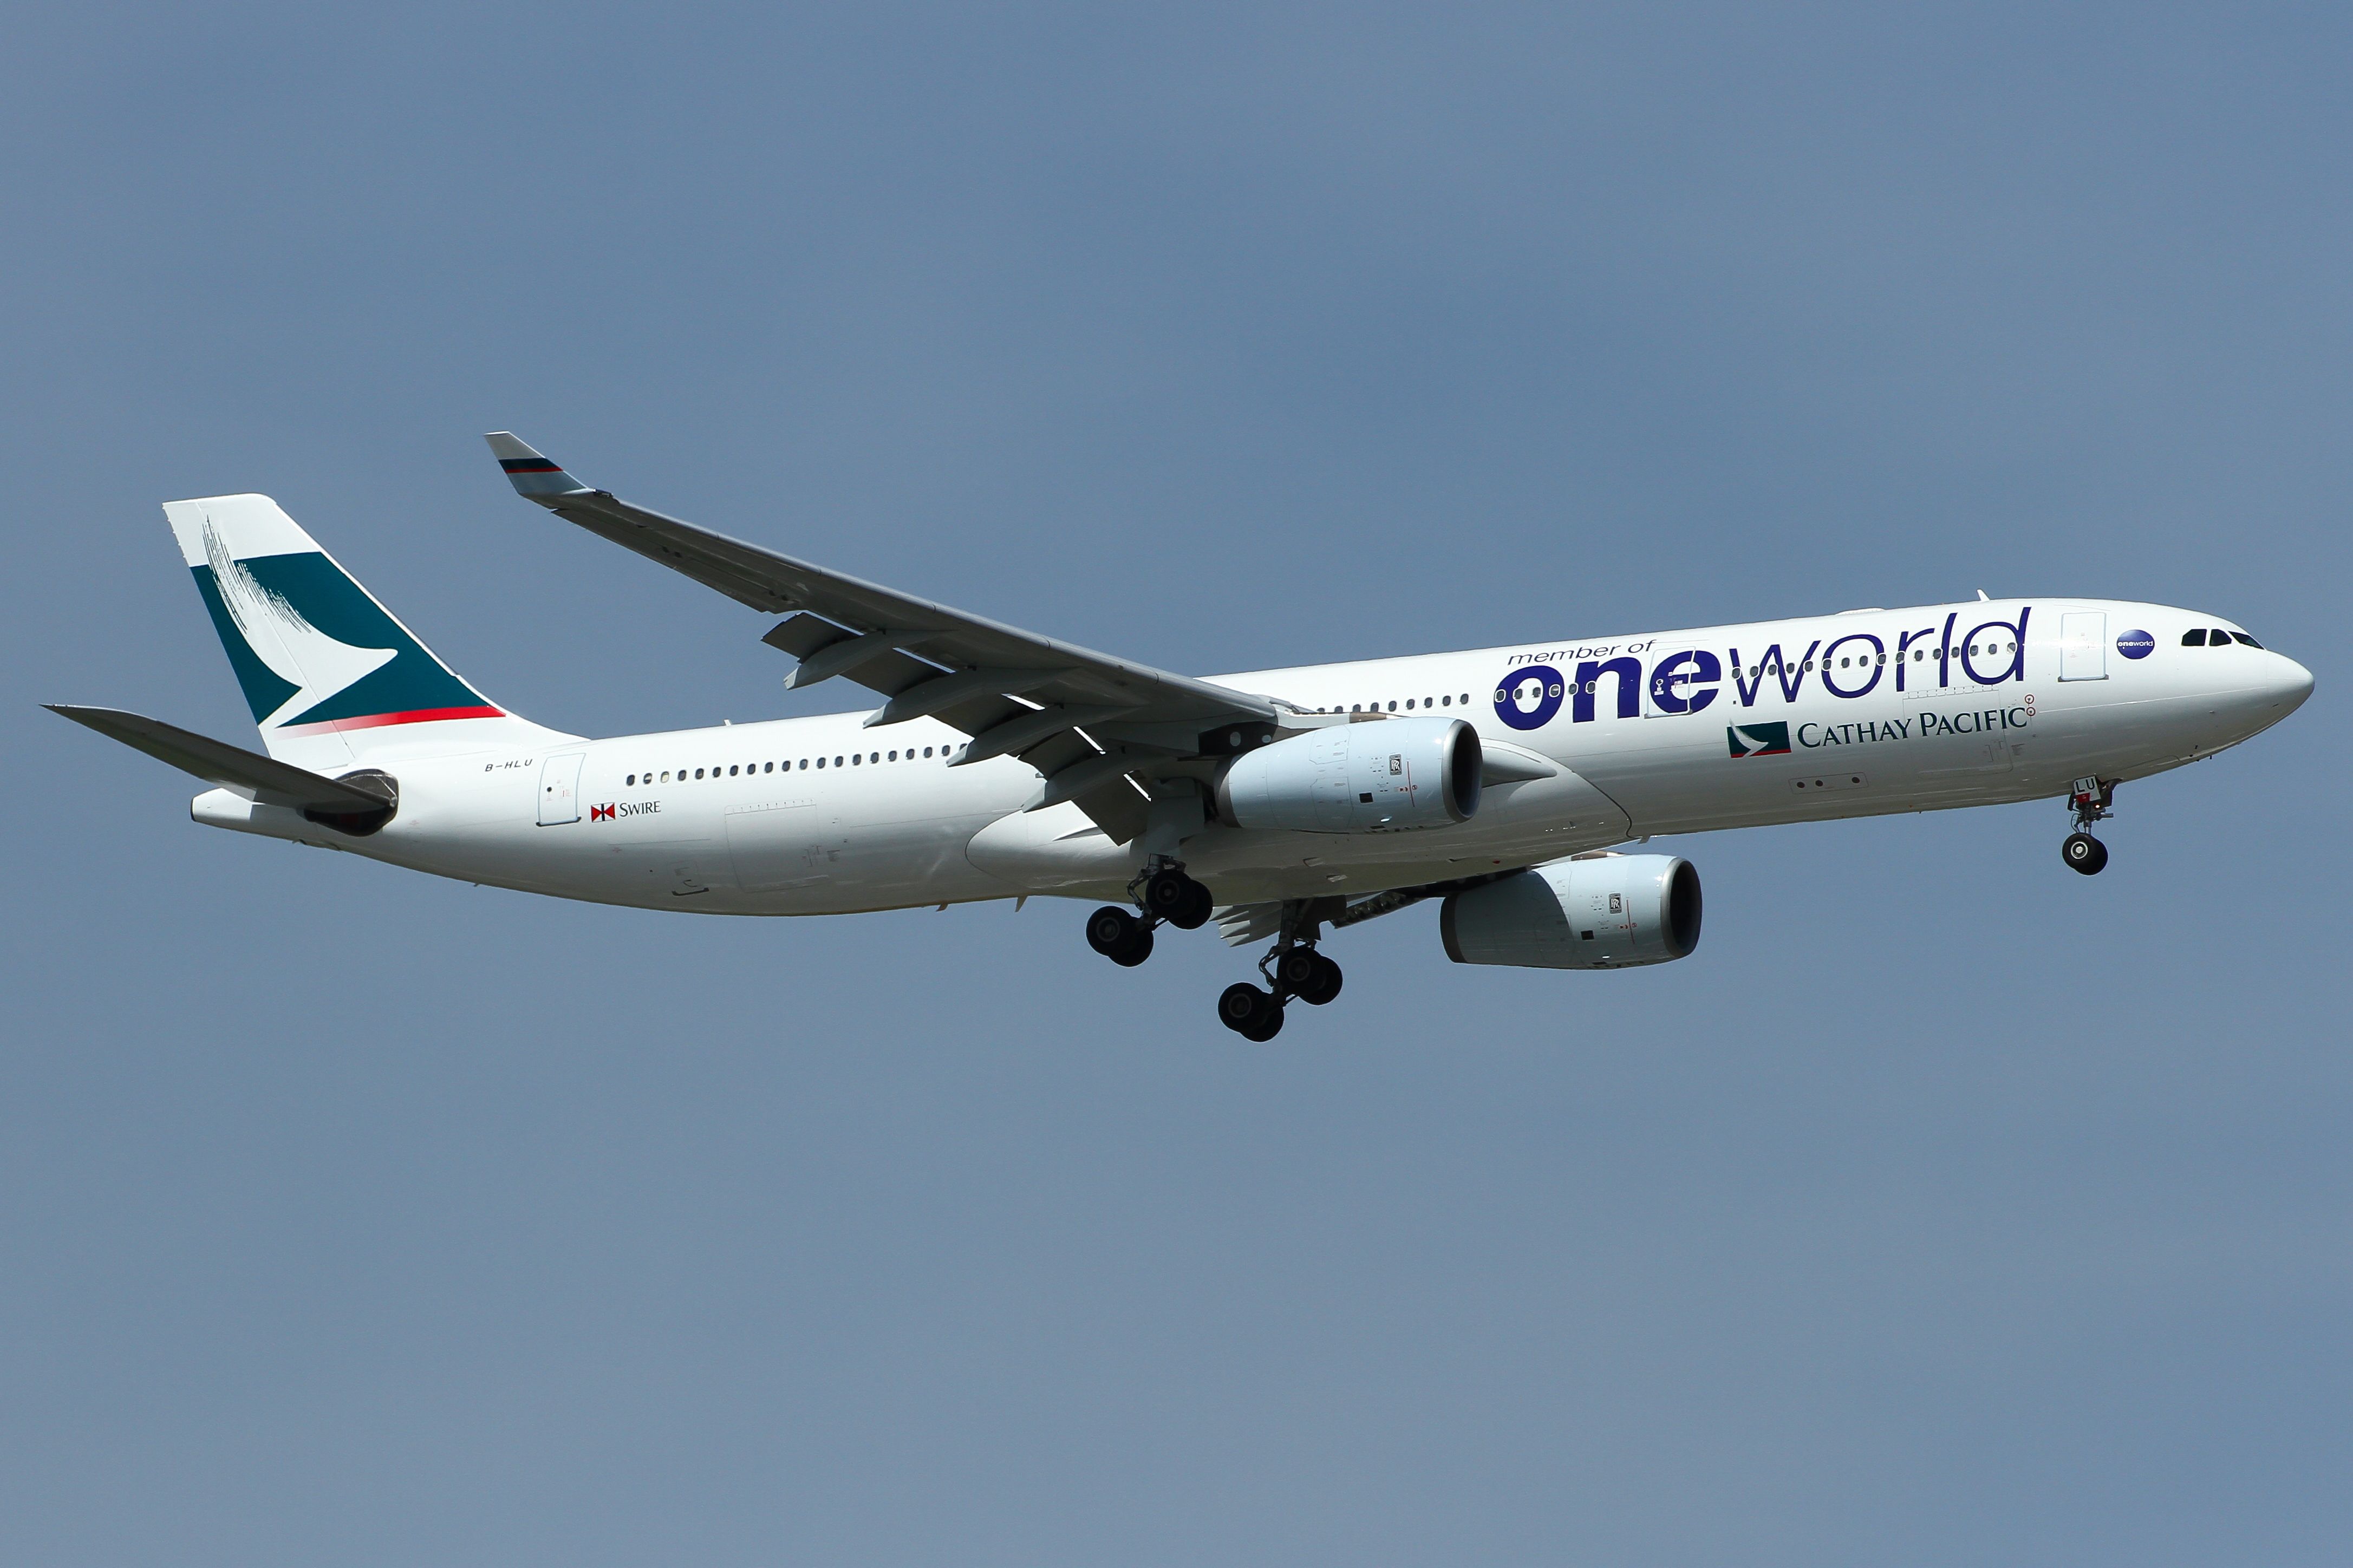 A Cathay Pacific Airbus A330-300 in oneworld livery flying in the sky.